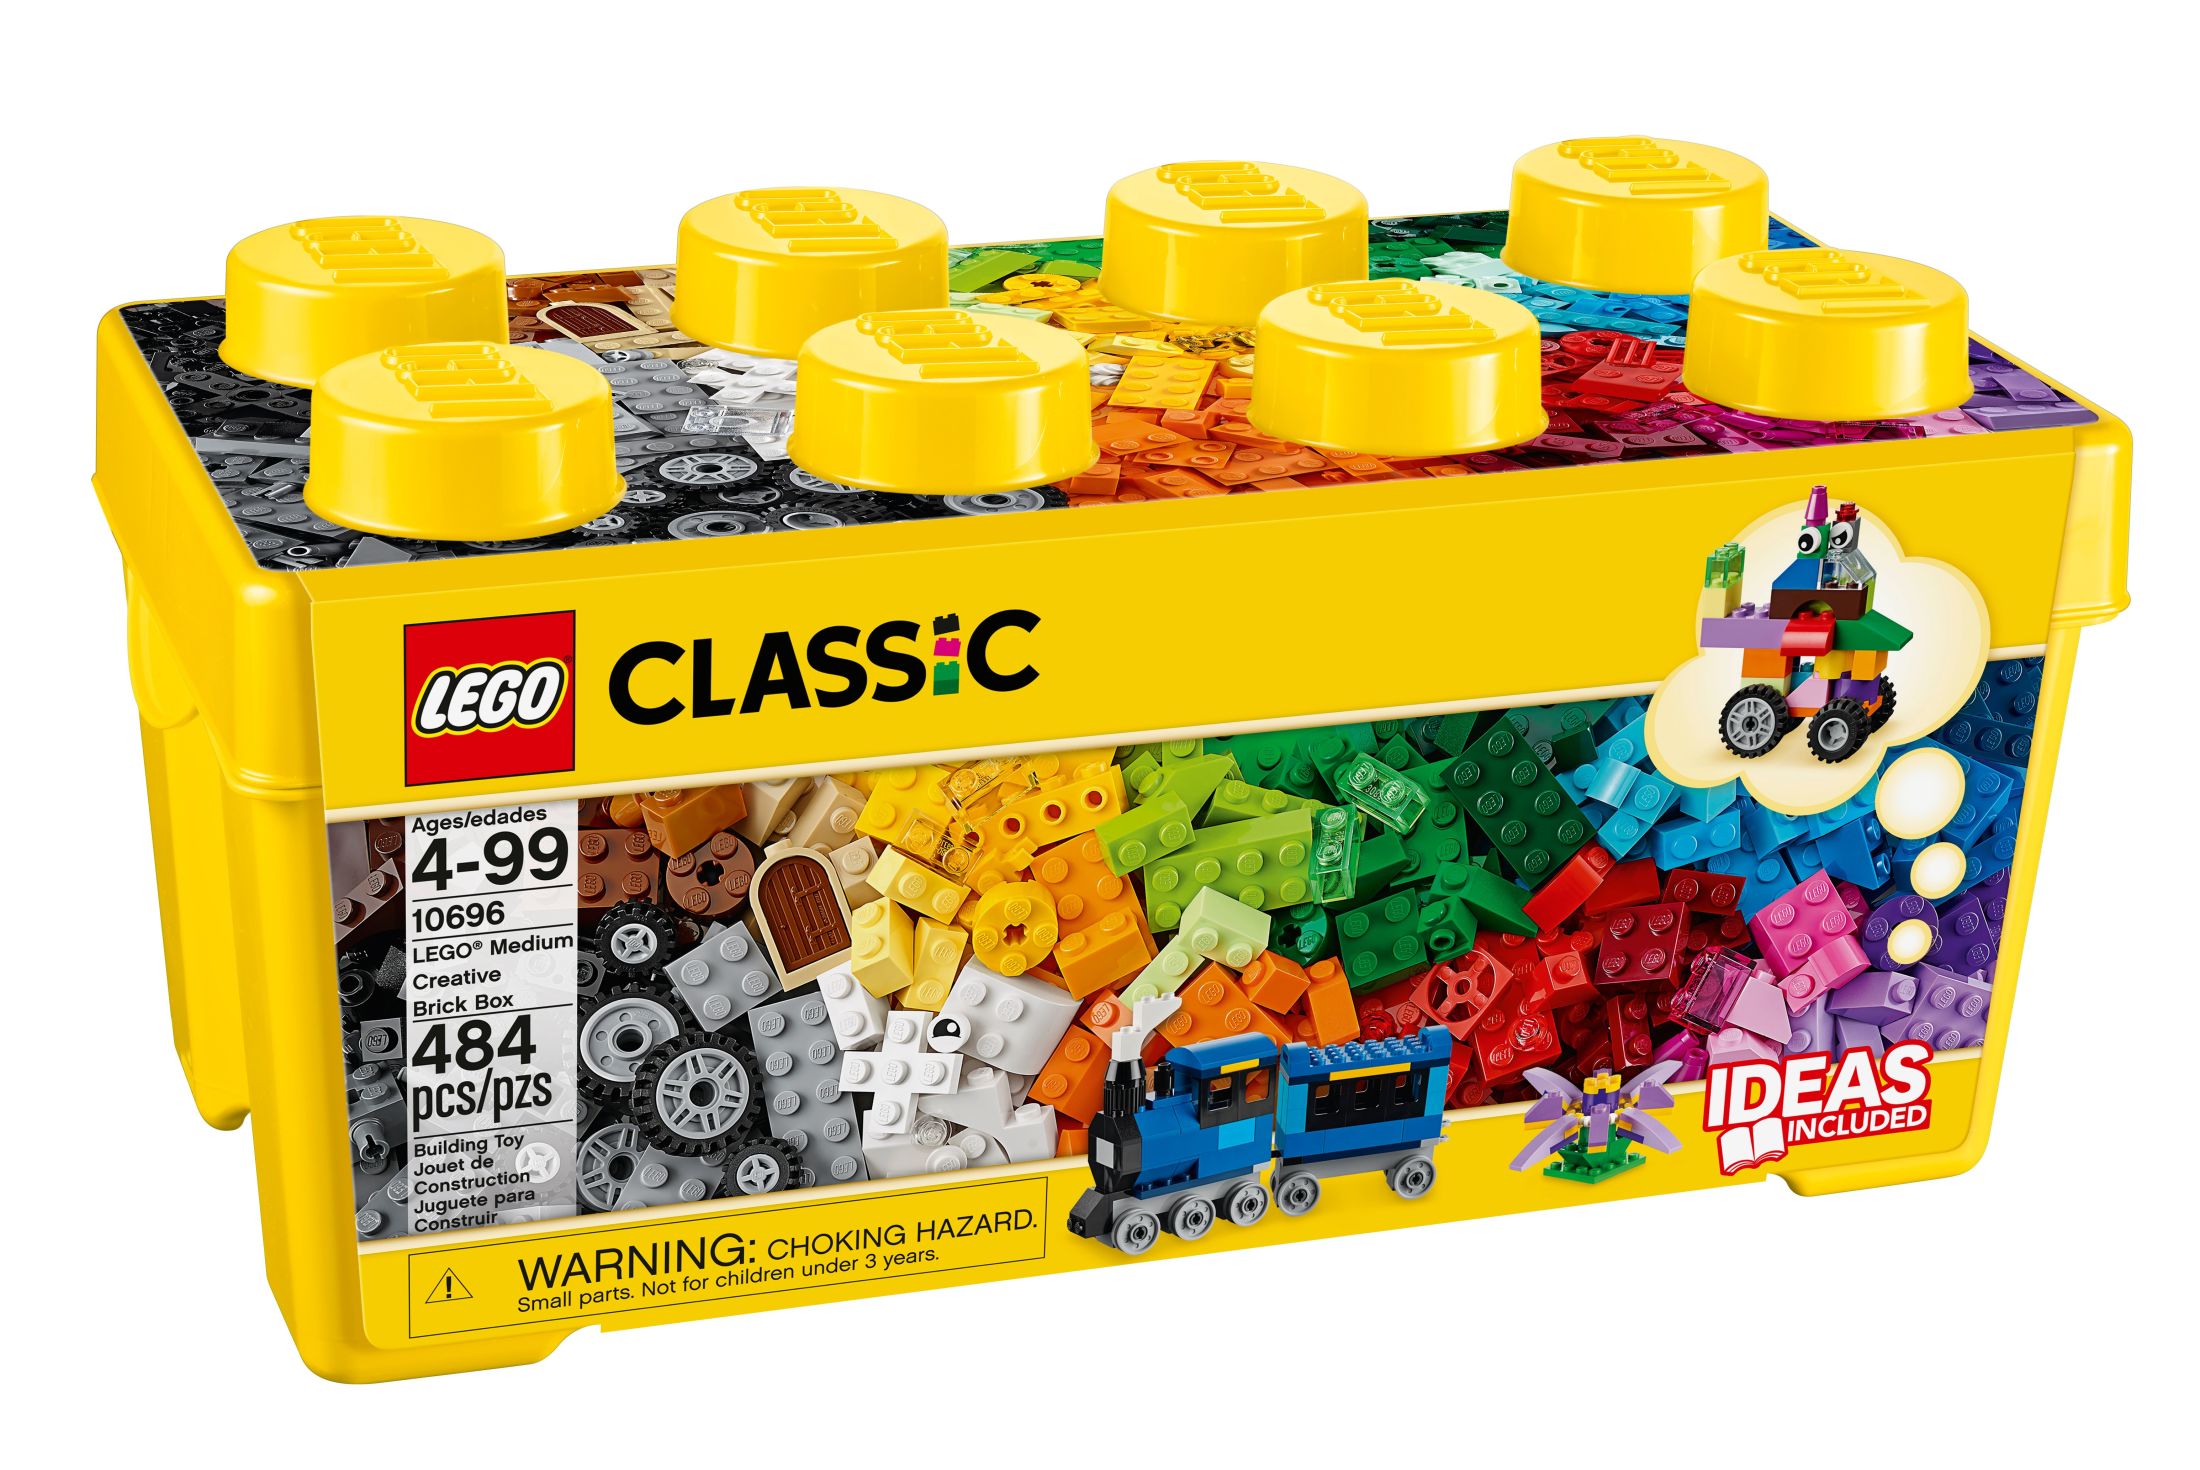 LEGO Classic Medium Creative Brick Box 10696 Building Toy Set with Storage, Includes Train, Car, and a Tiger Figure, Perfect Gift and Playset for Boys and Girls, Sensory Toy for Kids Ages 4 and up - image 3 of 6